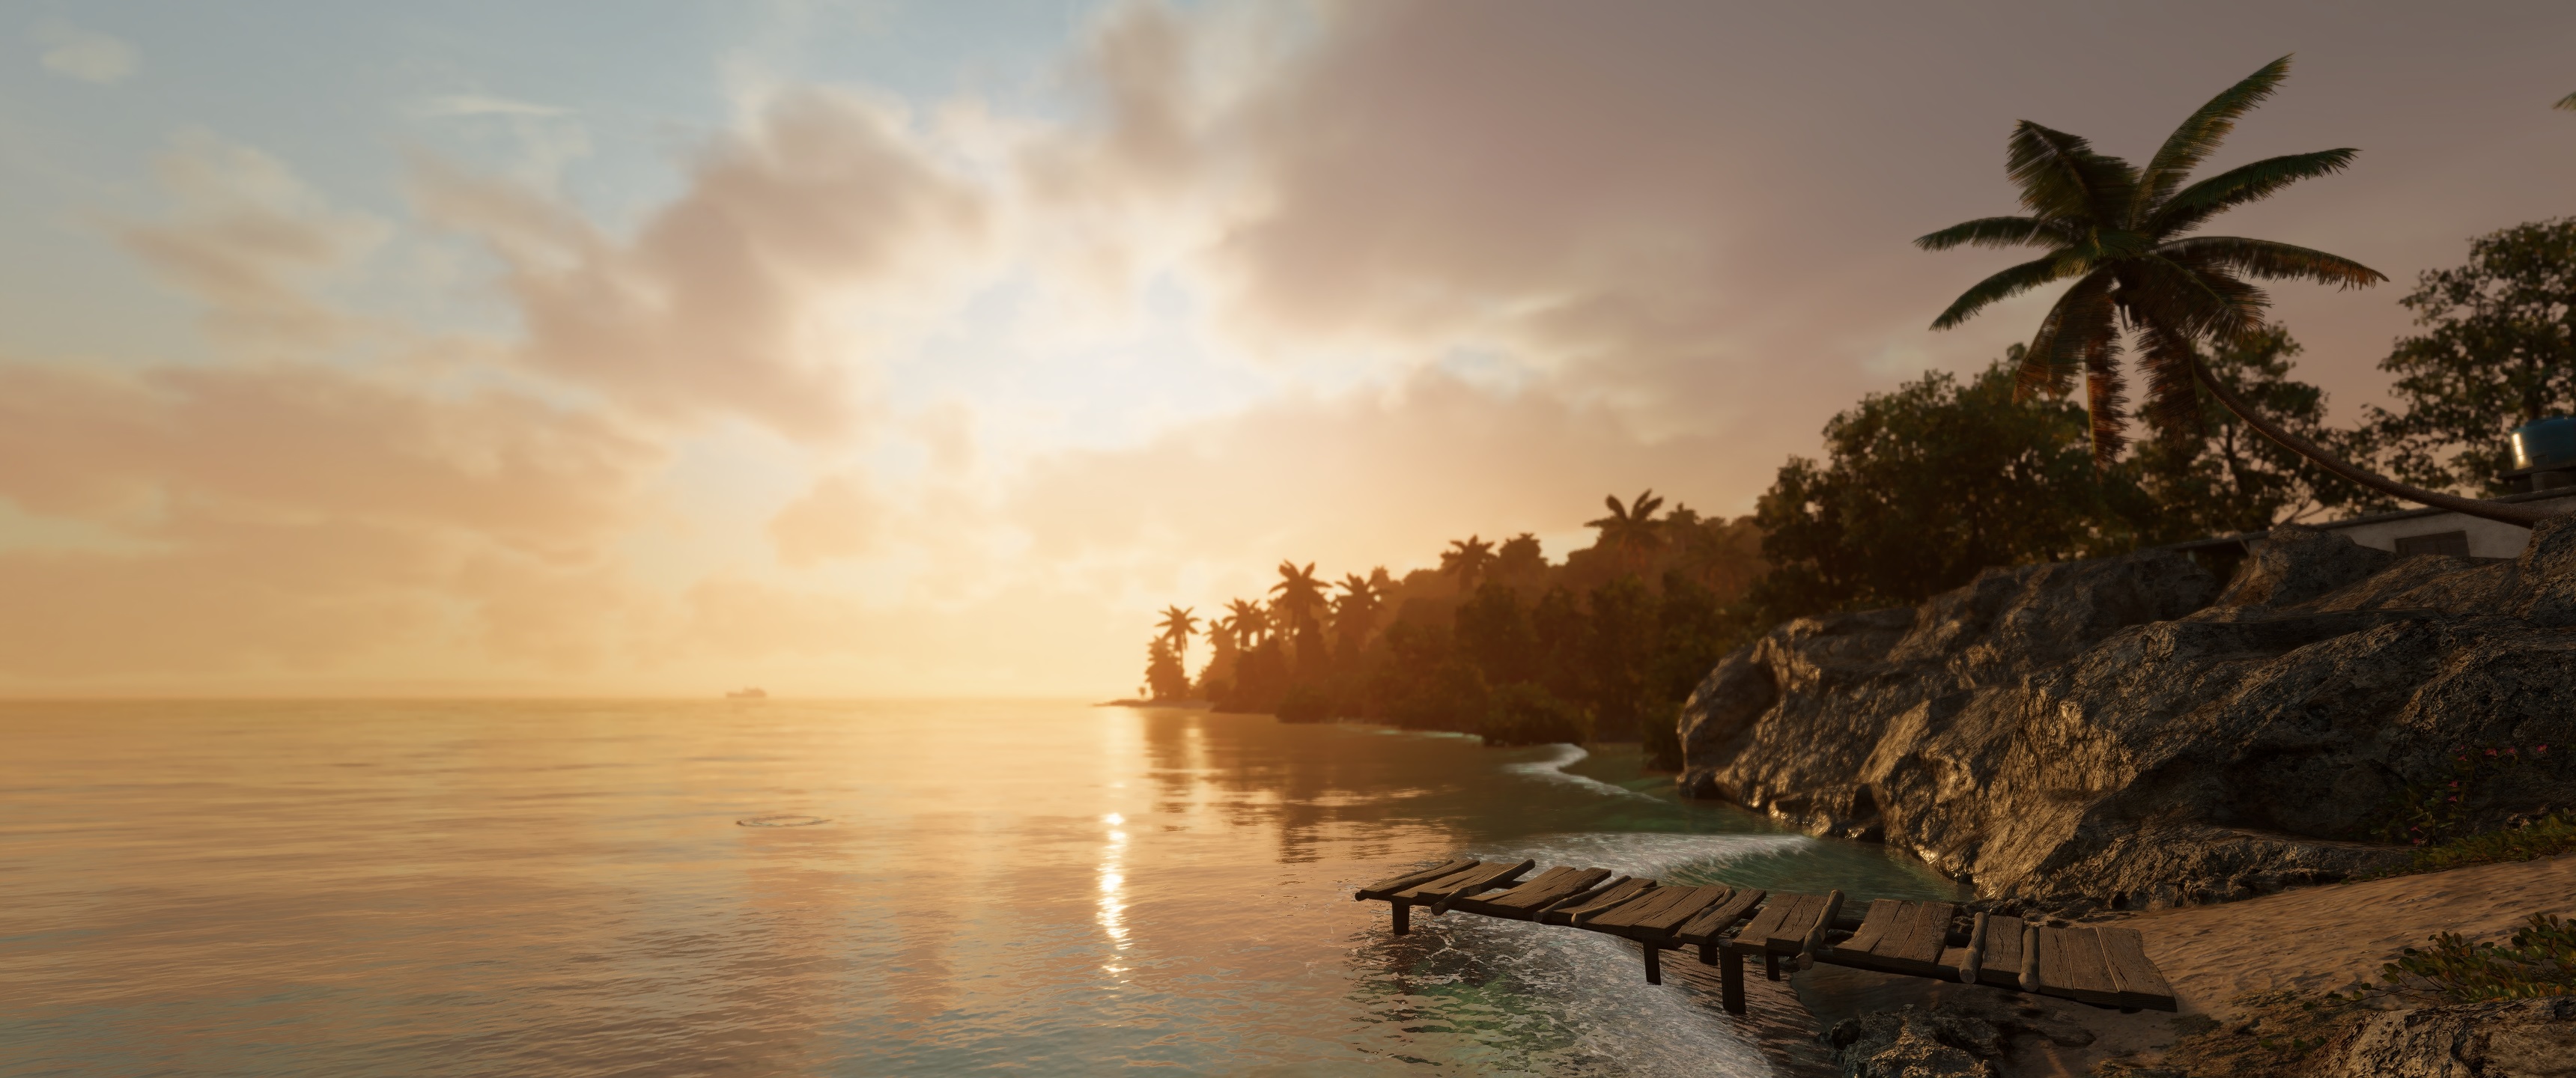 Farcry 6 Video Games 3440x1440